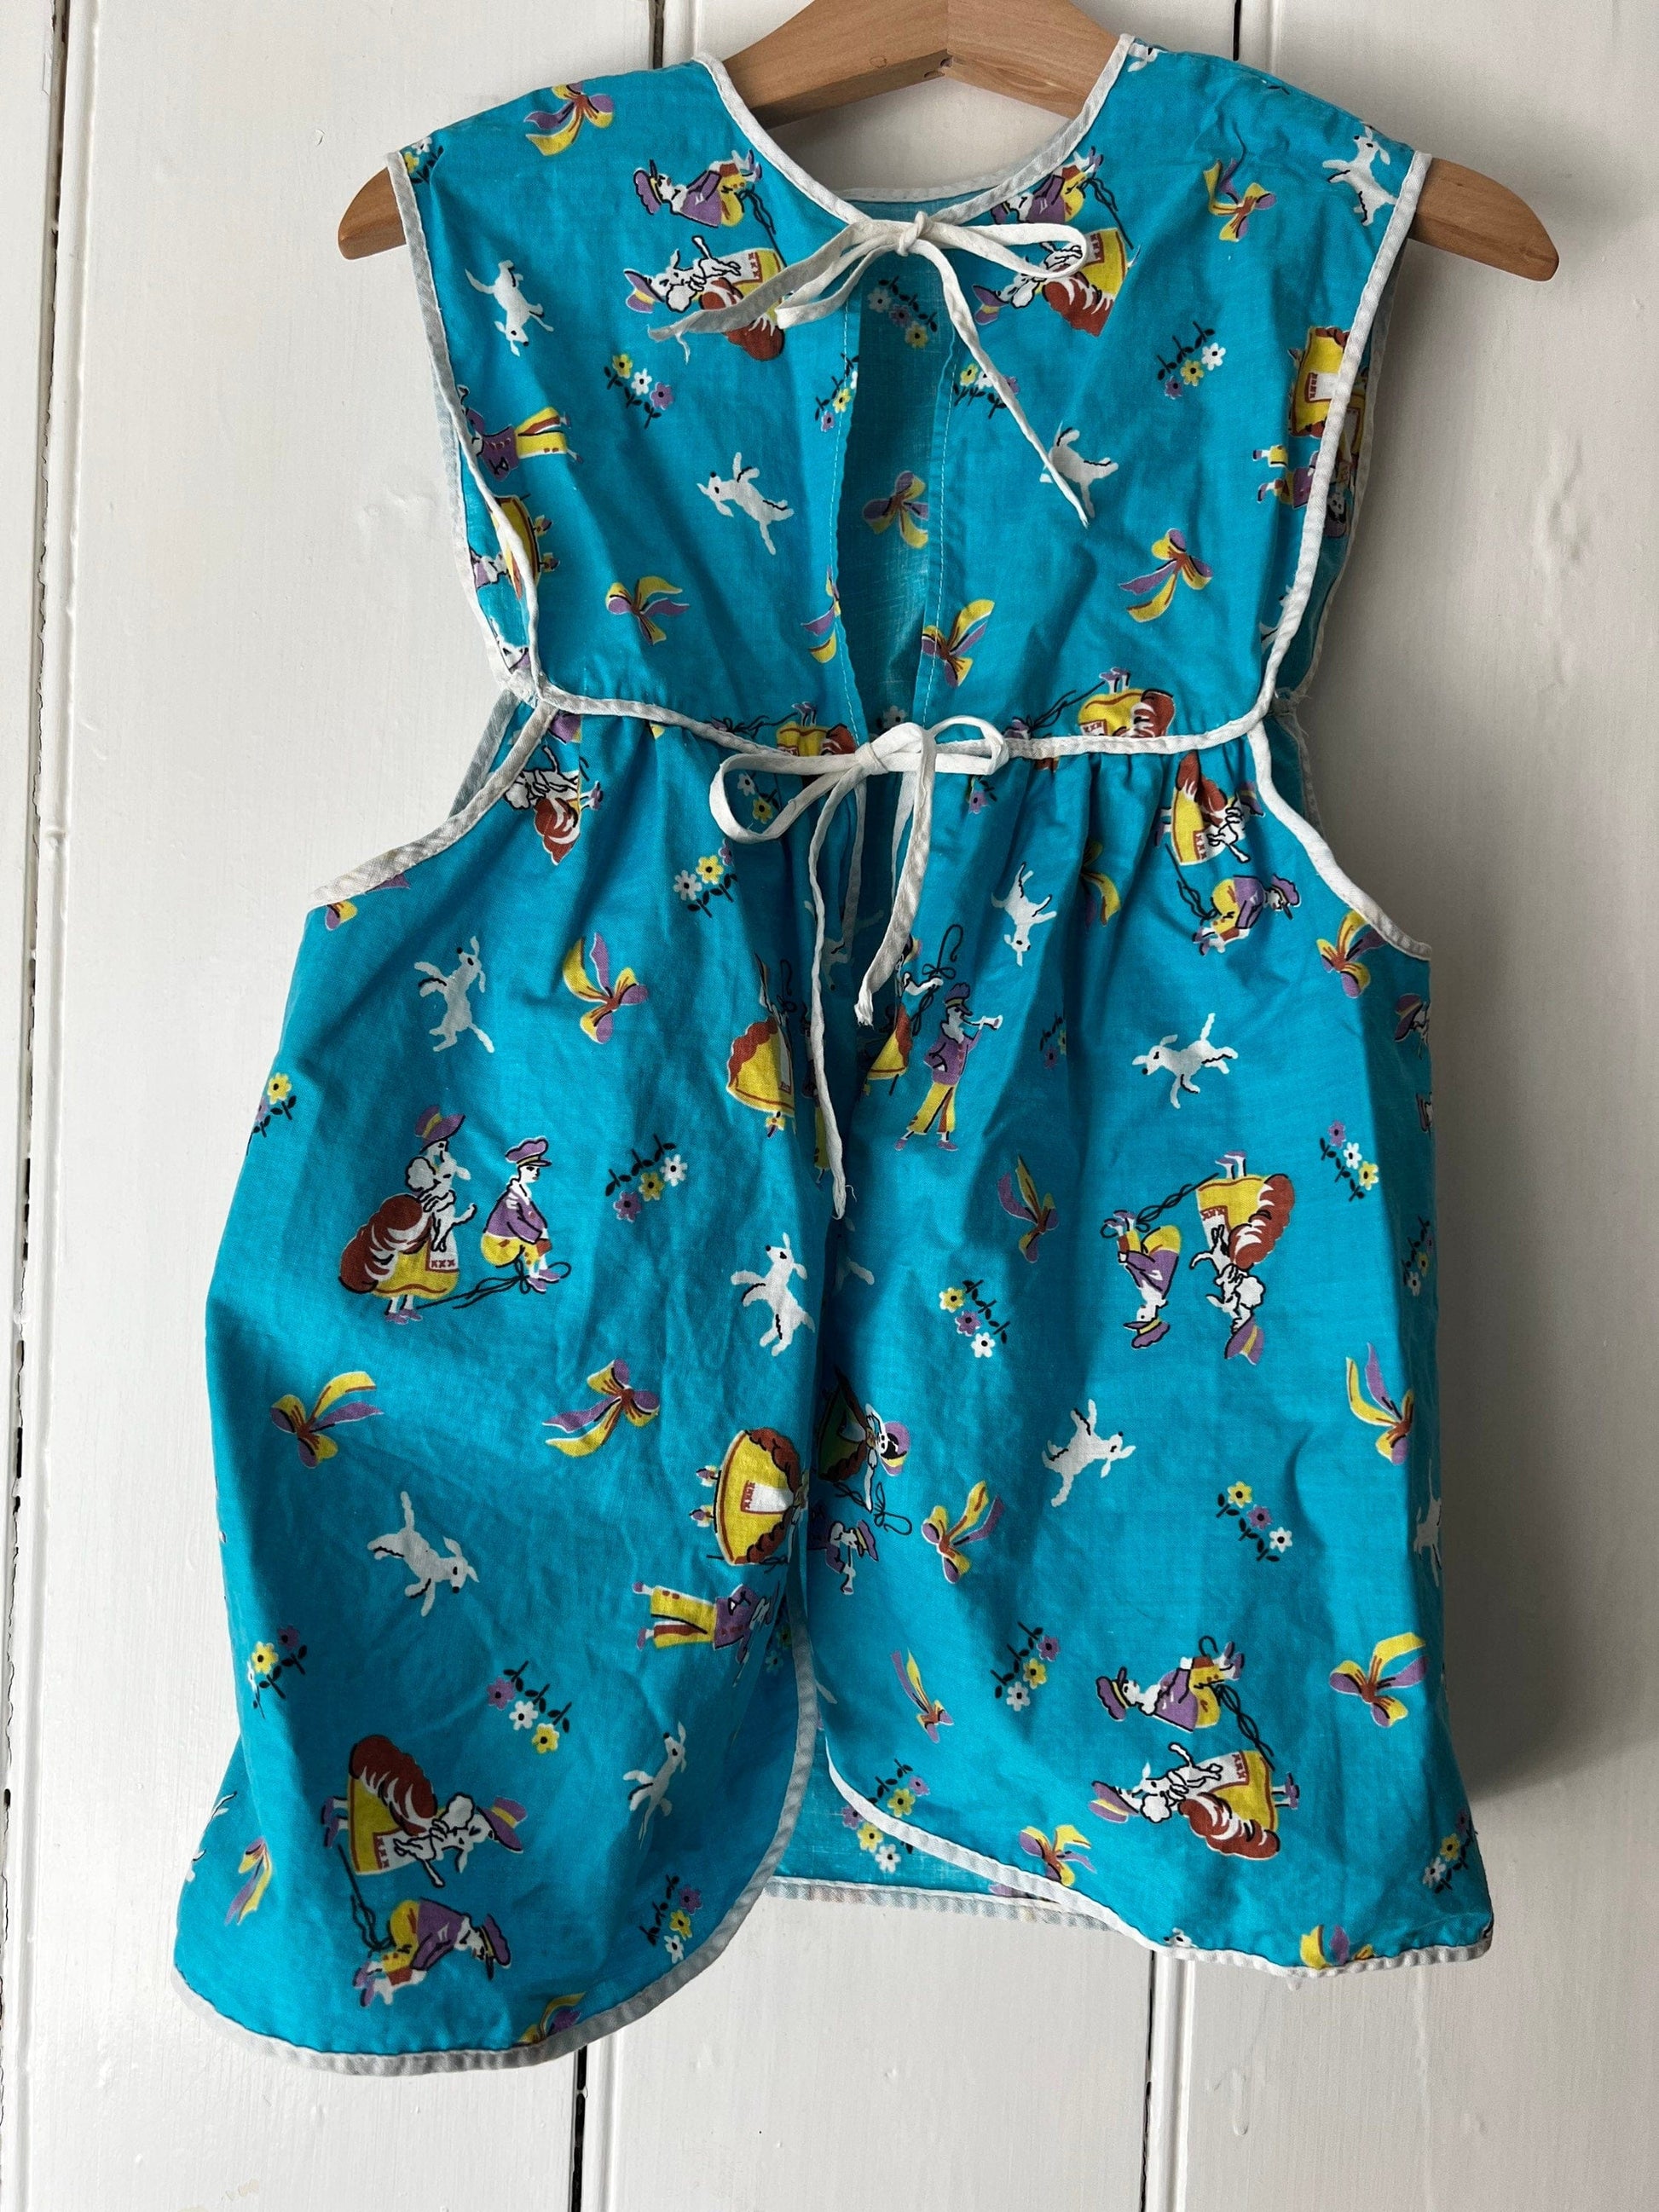 Vintage Girls Pinafore Dress - Blue Over Dress Baby Dress 2-3 years